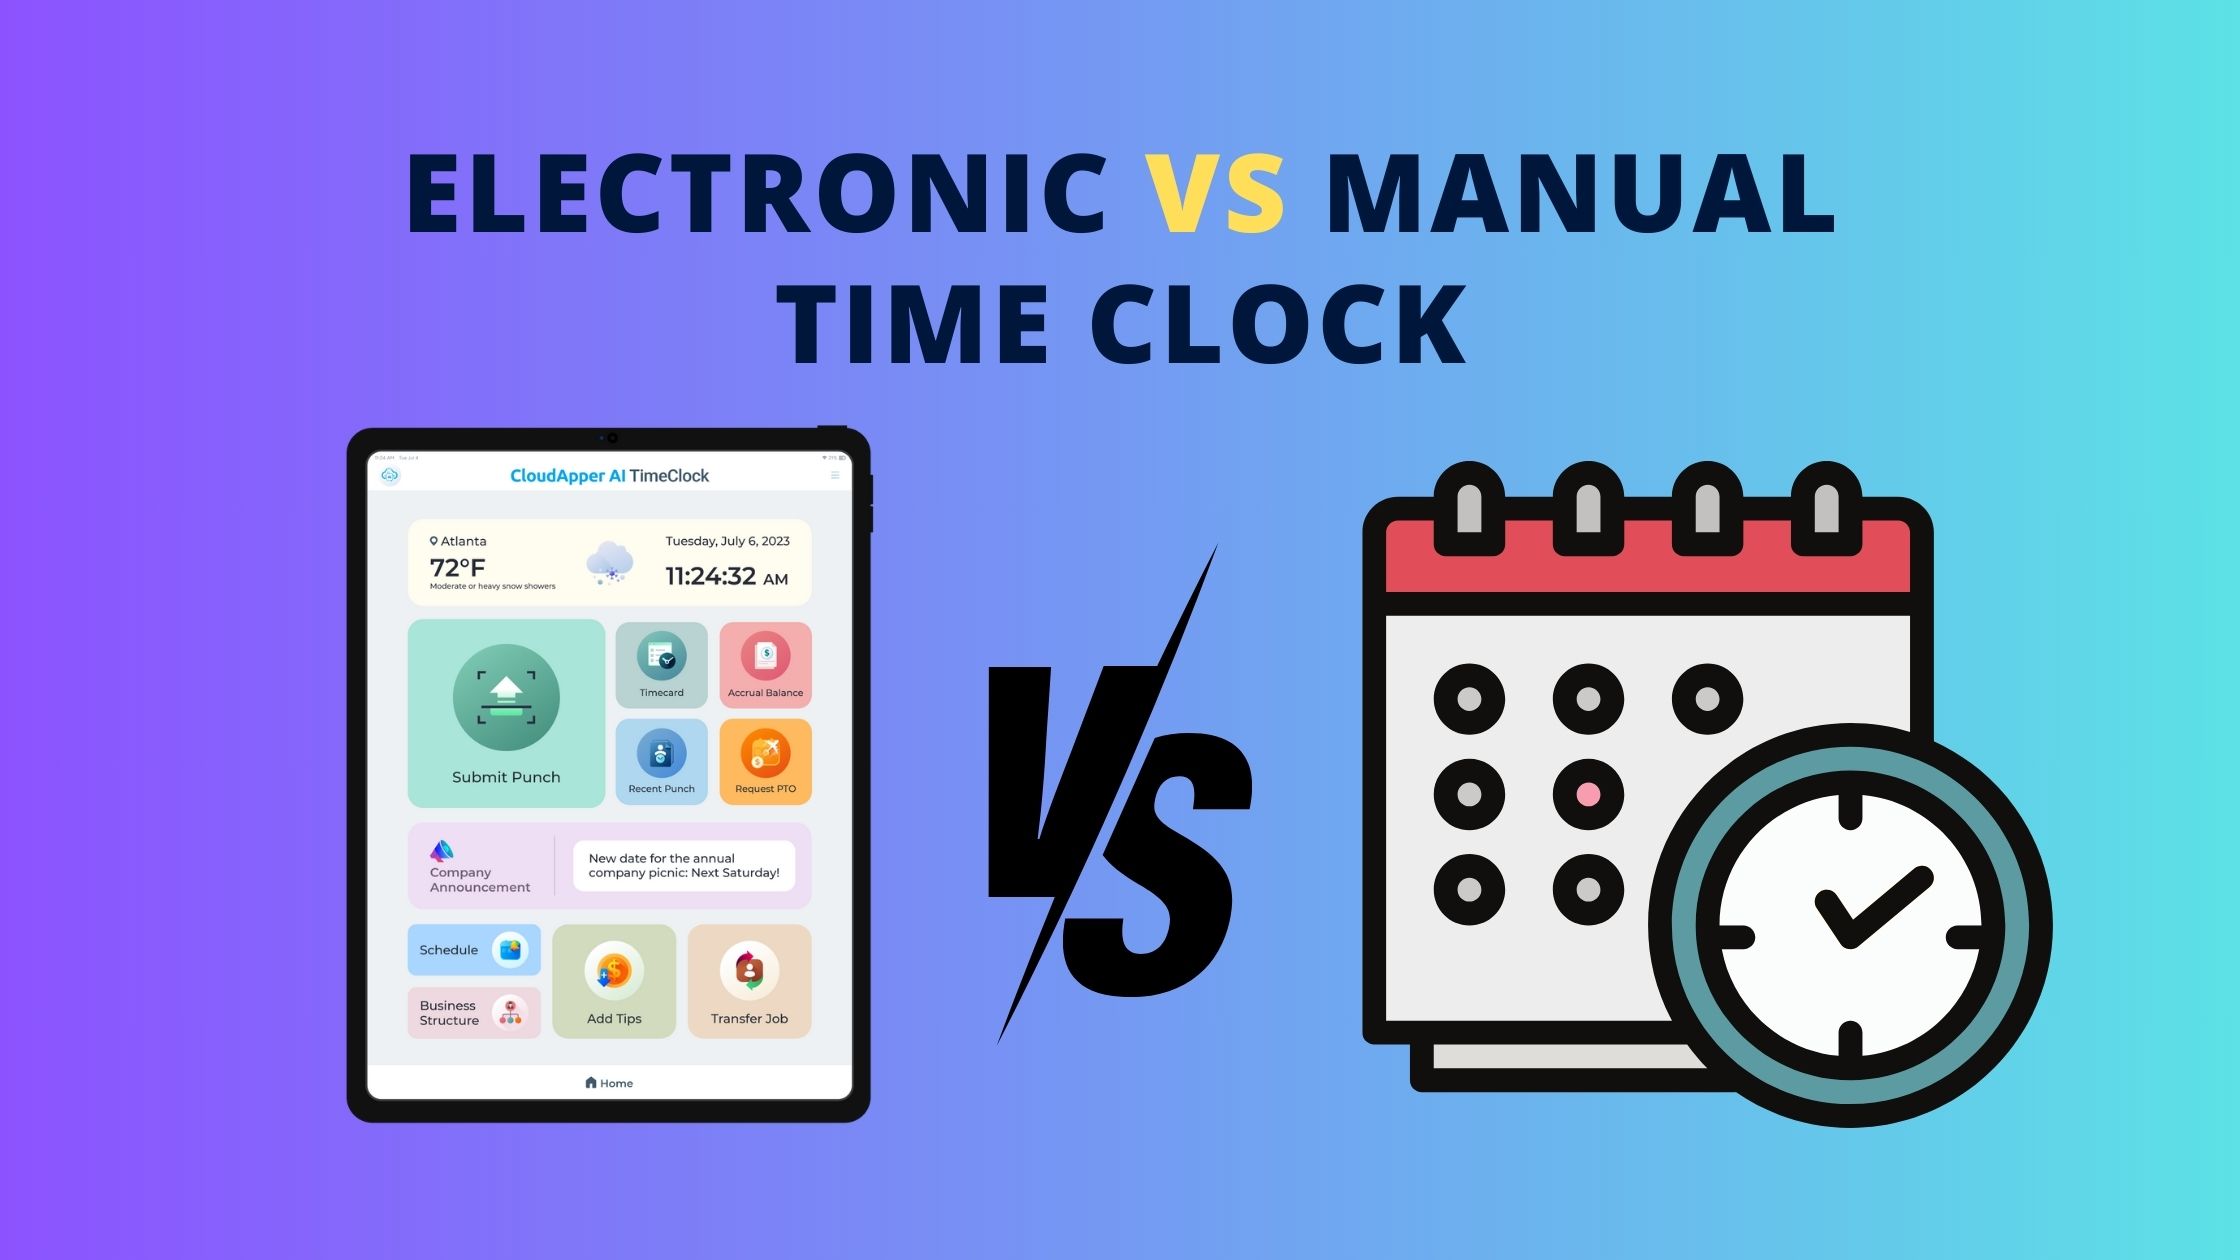 Electronic Time Clock vs Manual Time Clock - Which One is Better